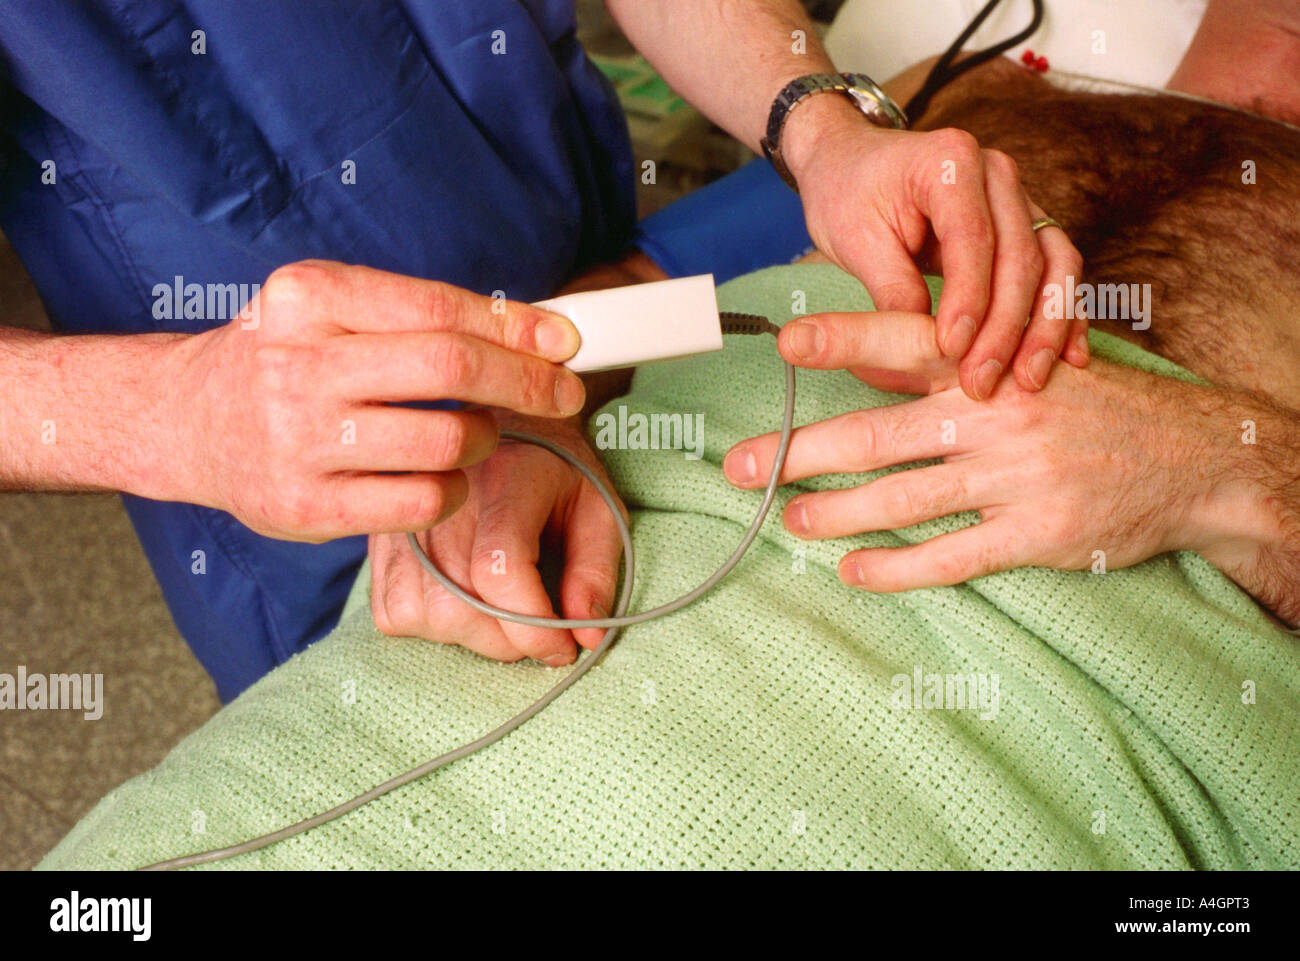 pulse oximeter finger probe plethysmography pulse oximetry monitoring non invasive photograph patient anaesthesia anaesthetic ro Stock Photo